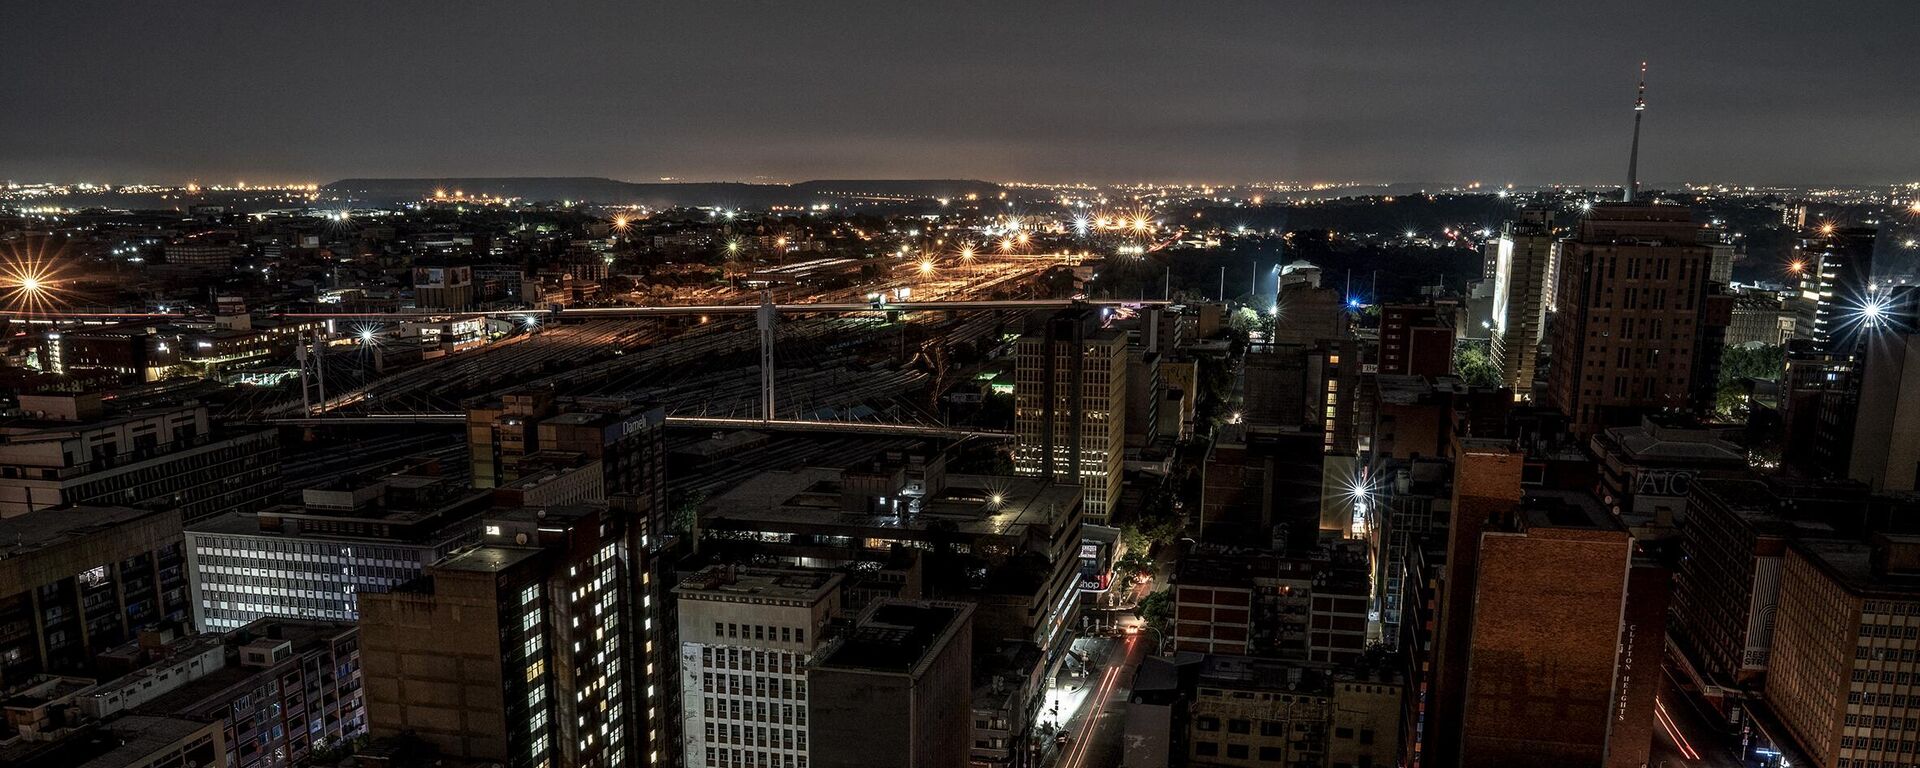 A general view of some parts of Braamfontein, Johannesburg submerged in darkness due to load-shedding (rolling blackout) on January 31, 2023. - Sputnik International, 1920, 10.03.2023